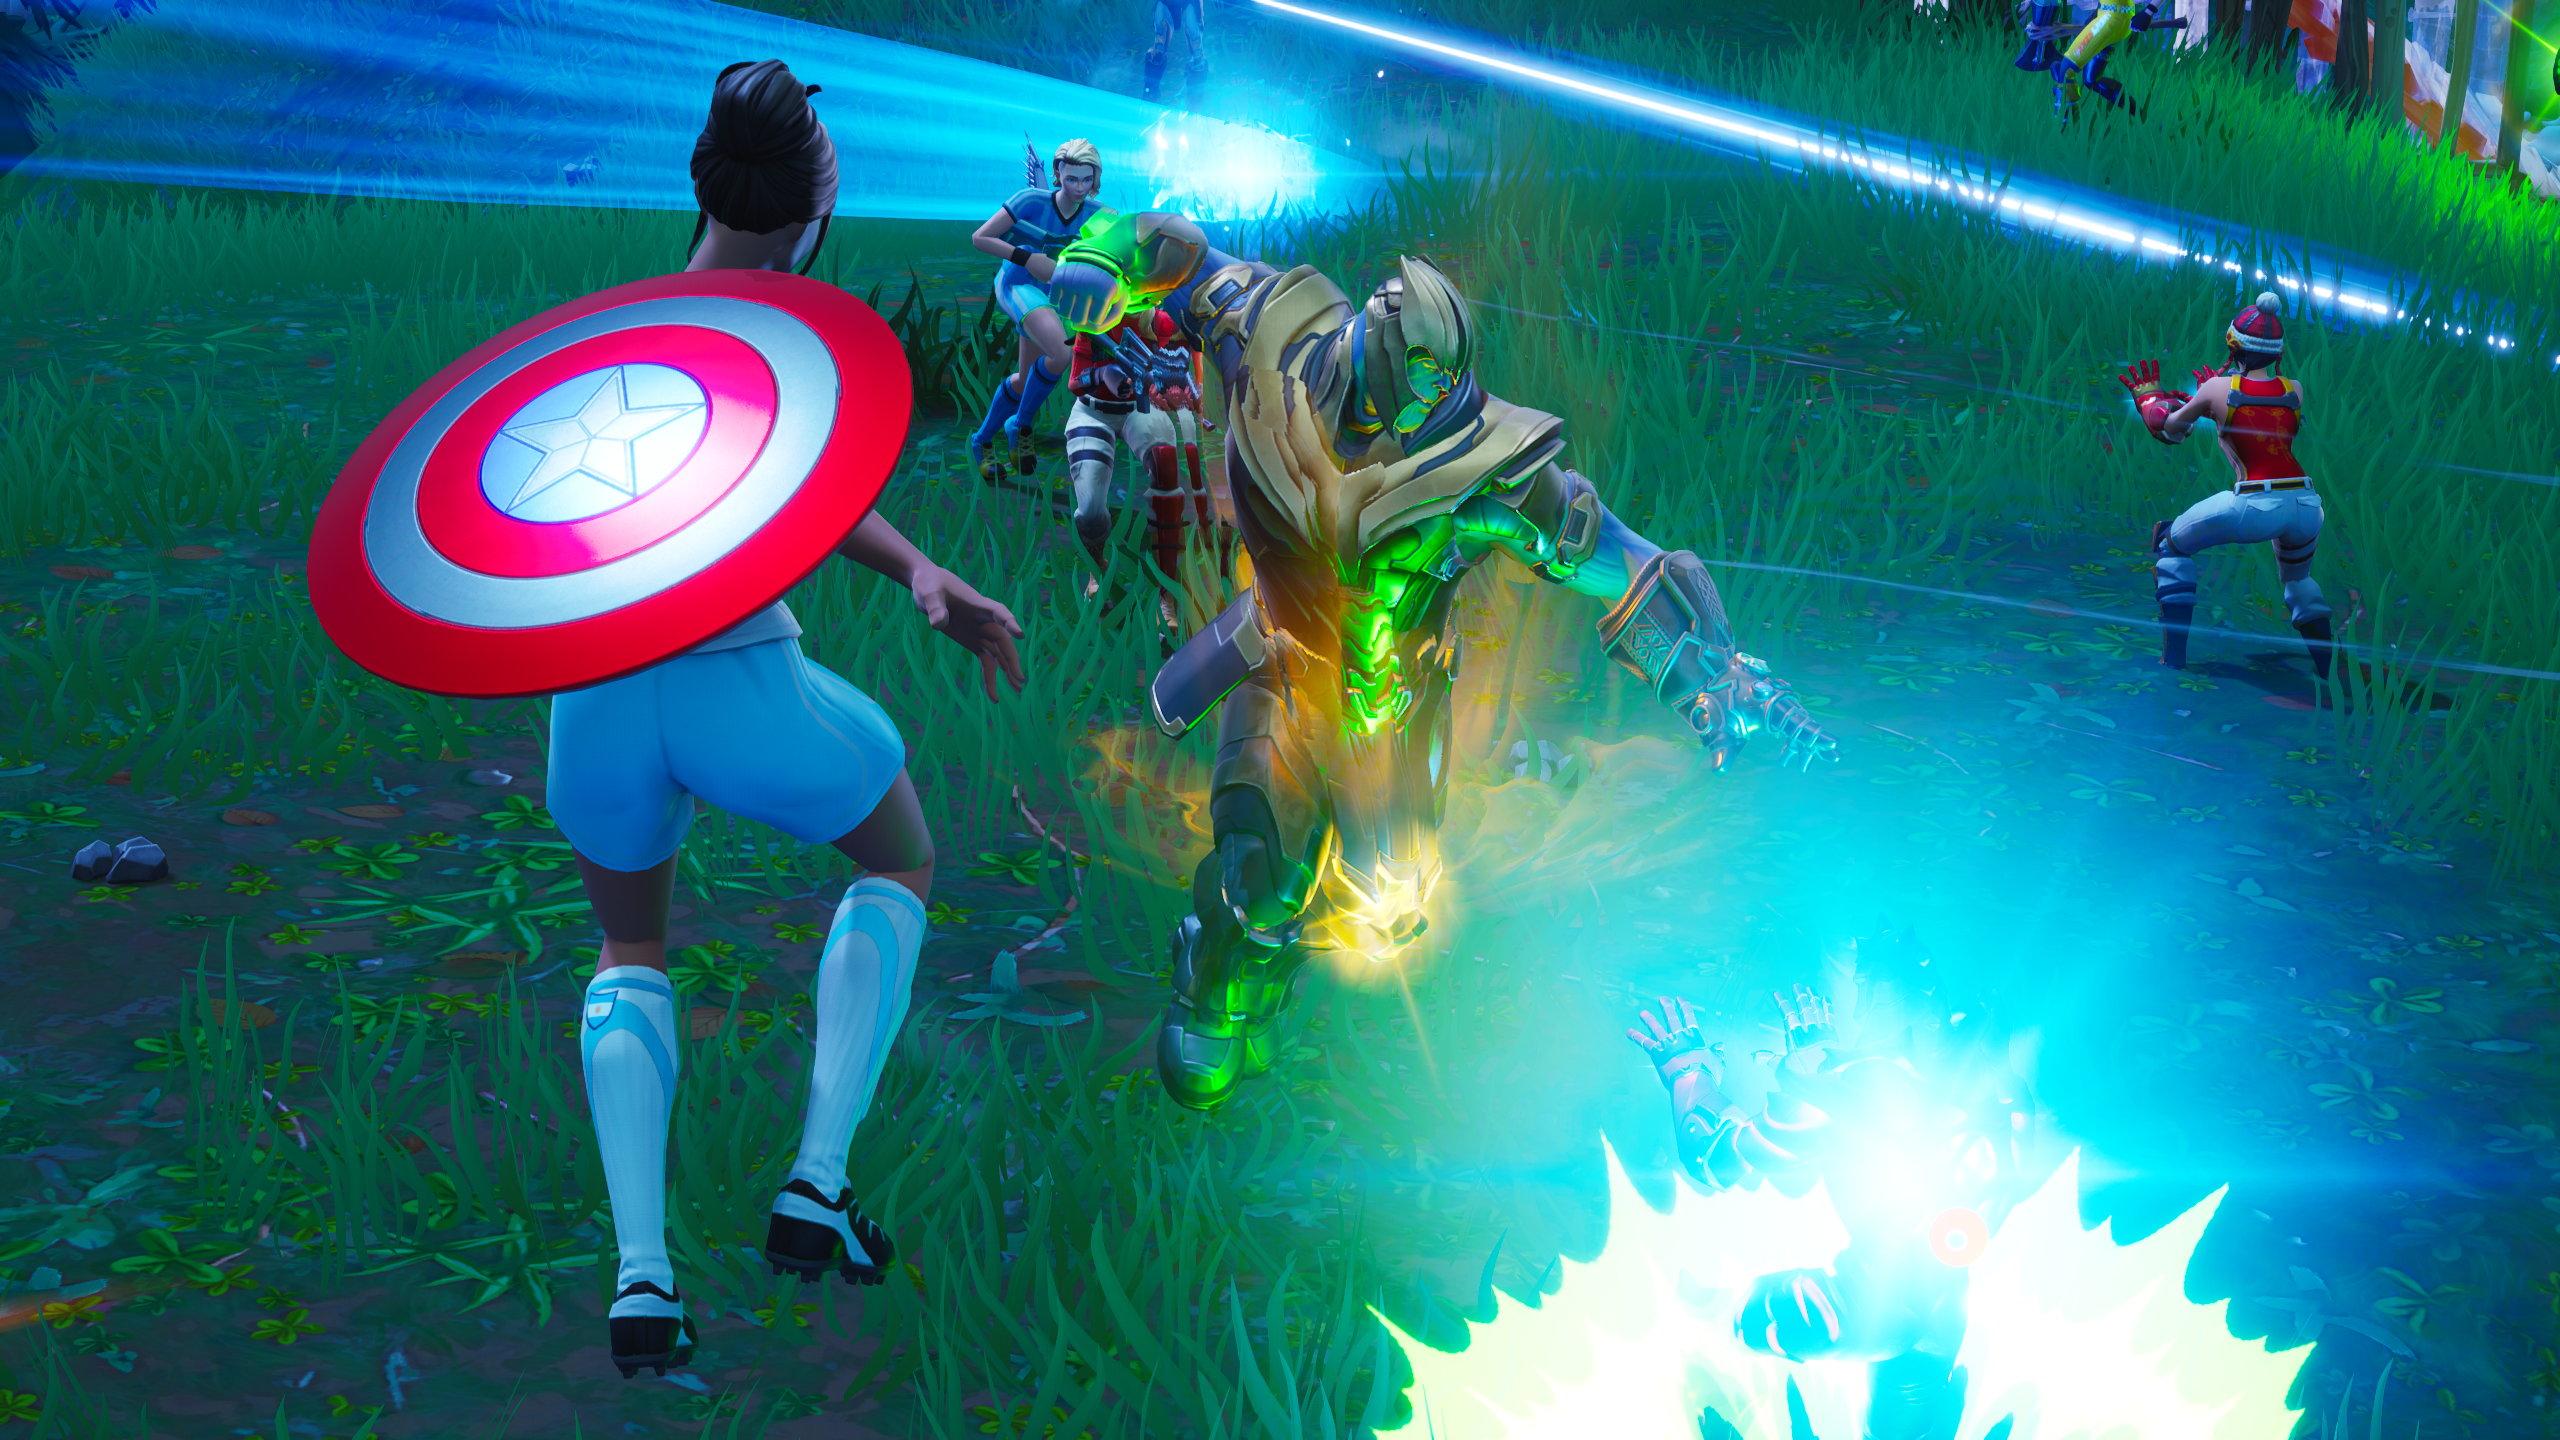 Free download Fortnite launches Avengers Endgame event Rock Paper